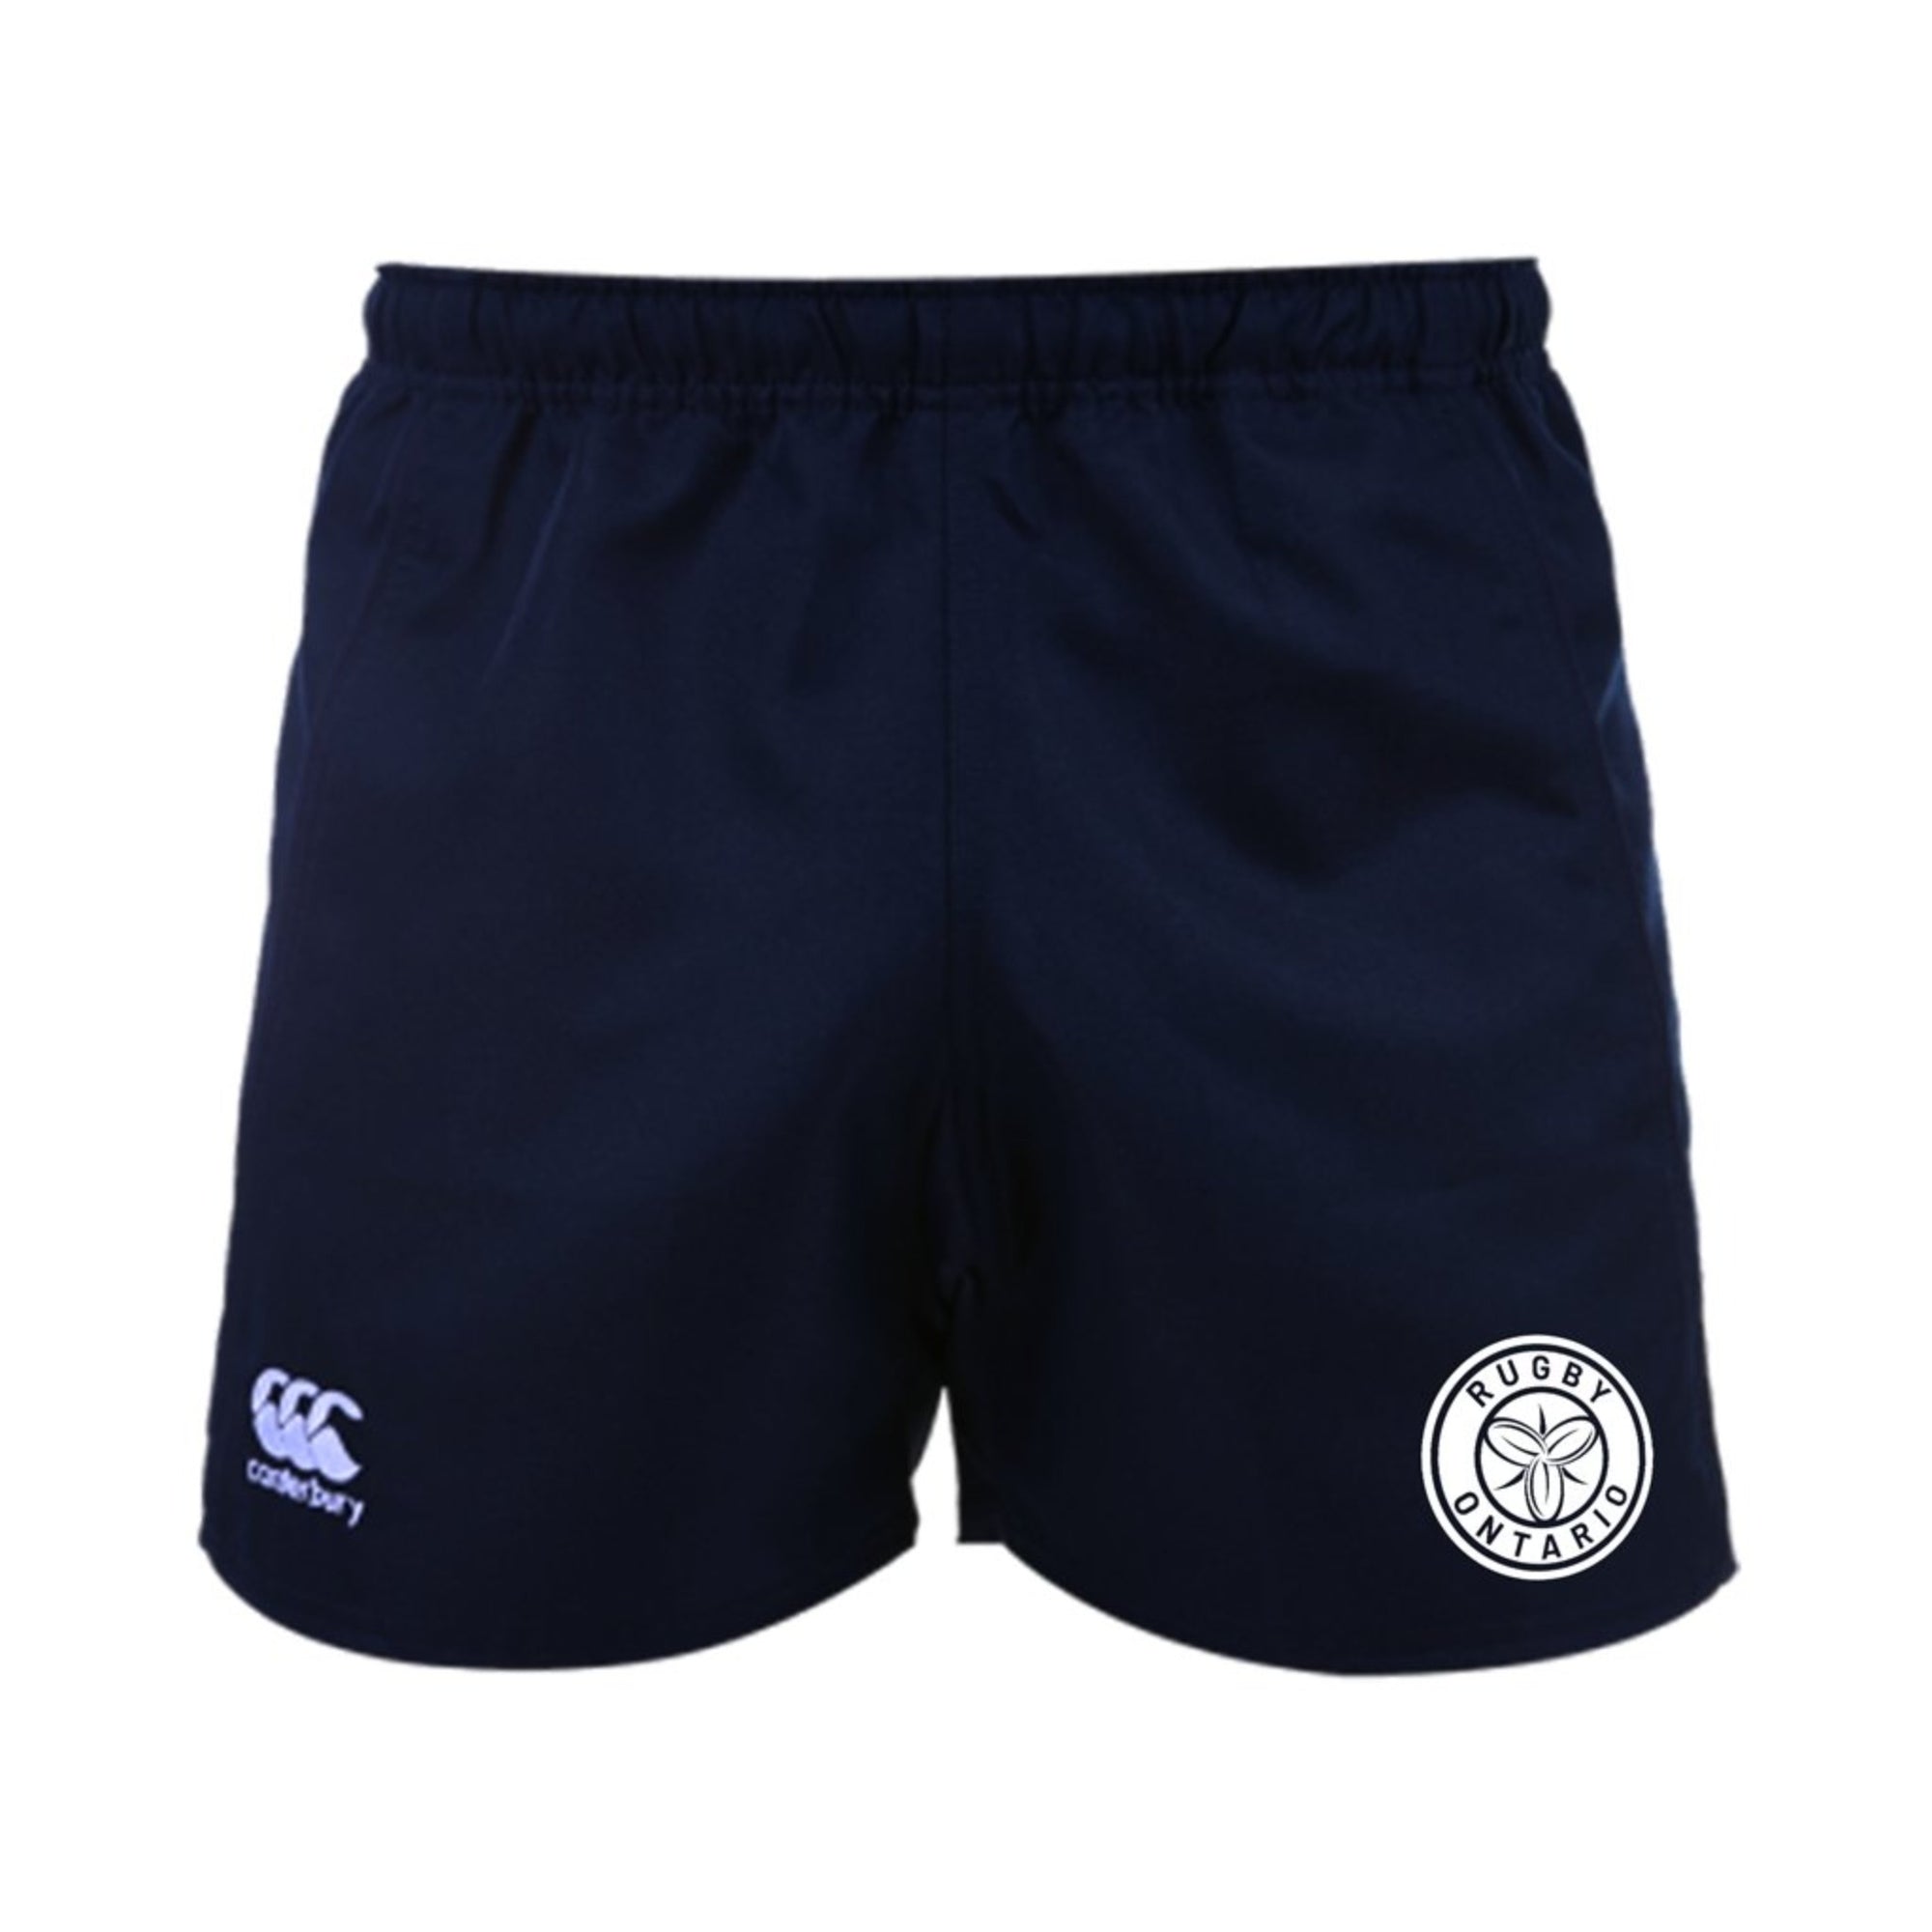 Rugby Ontario CCC Pro-Poly Pocketed Shorts - www.therugbyshop.com www.therugbyshop.com MEN'S / NAVY / XS TRS Distribution Canada SHORTS Rugby Ontario CCC Pro-Poly Pocketed Shorts